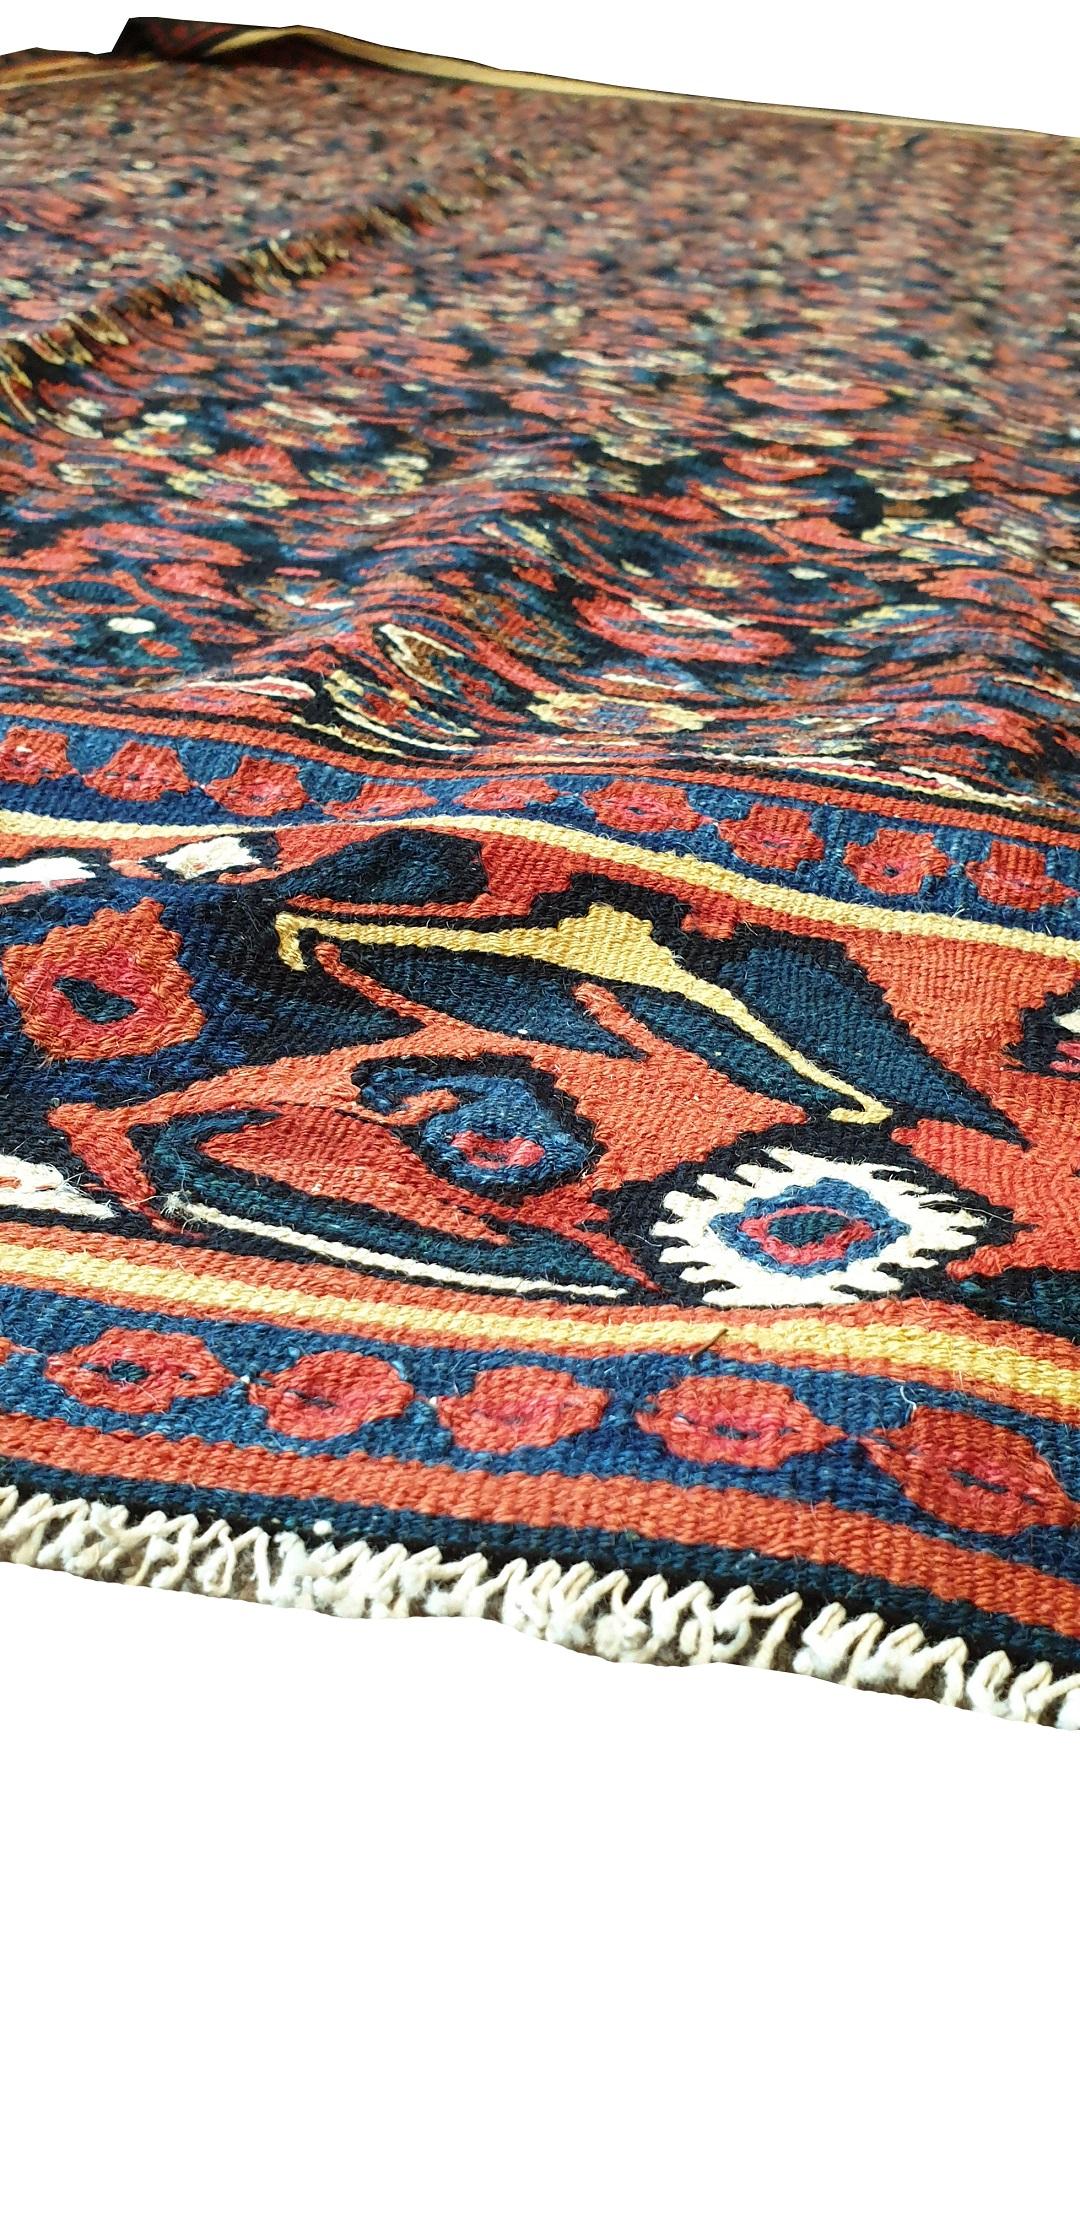 656 - Nice kilim from the end of the 20th century with beautiful patterns and beautiful colors pink, orange, yellow, green and dark blue, entirely hand-woven with wool woven on a cotton foundation.